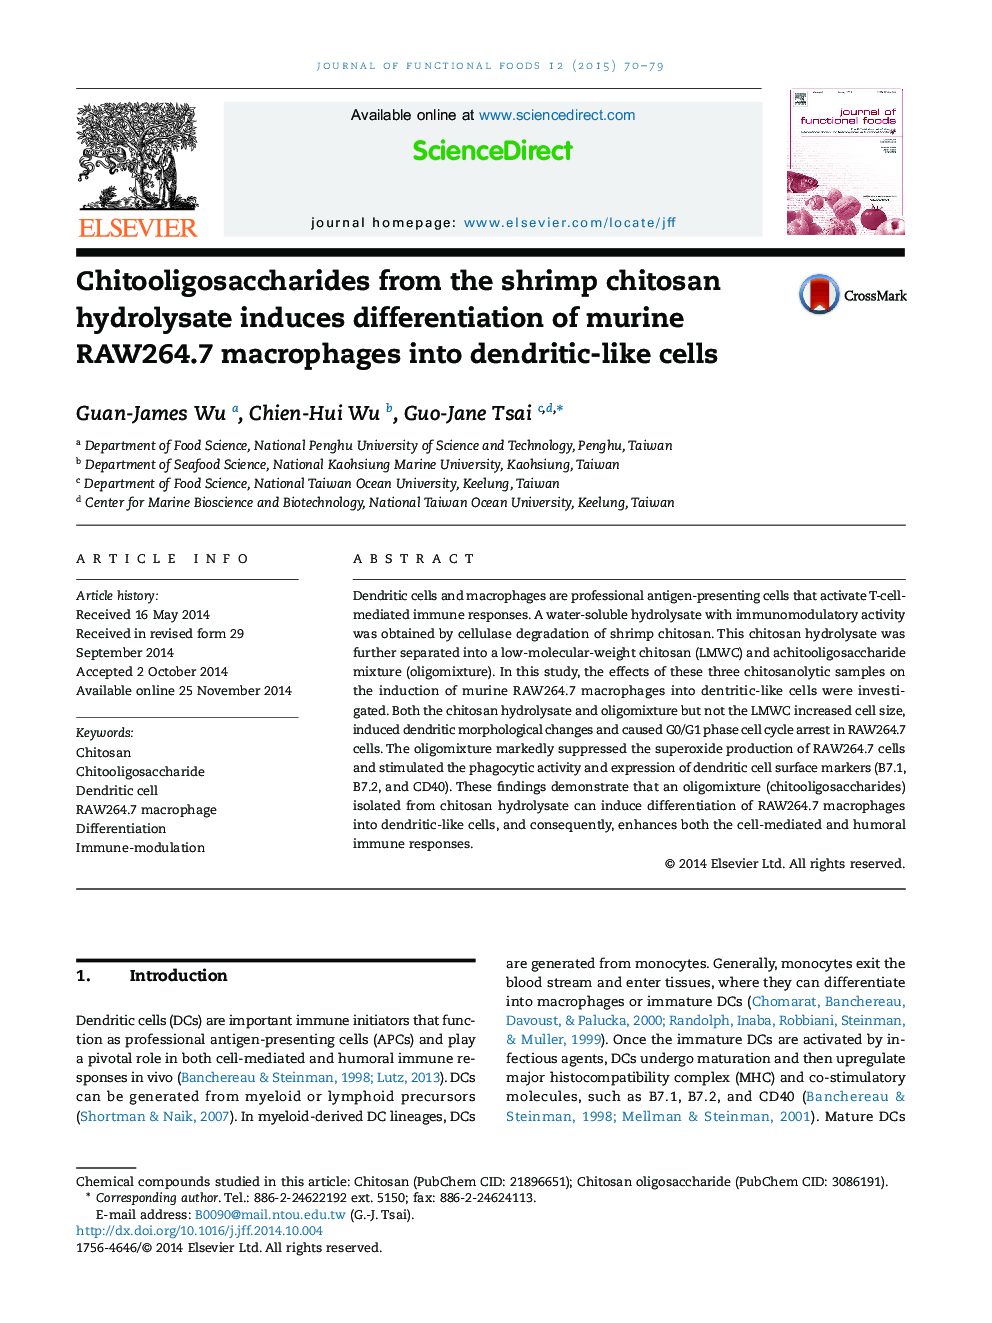 Chitooligosaccharides from the shrimp chitosan hydrolysate induces differentiation of murine RAW264.7 macrophages into dendritic-like cells 